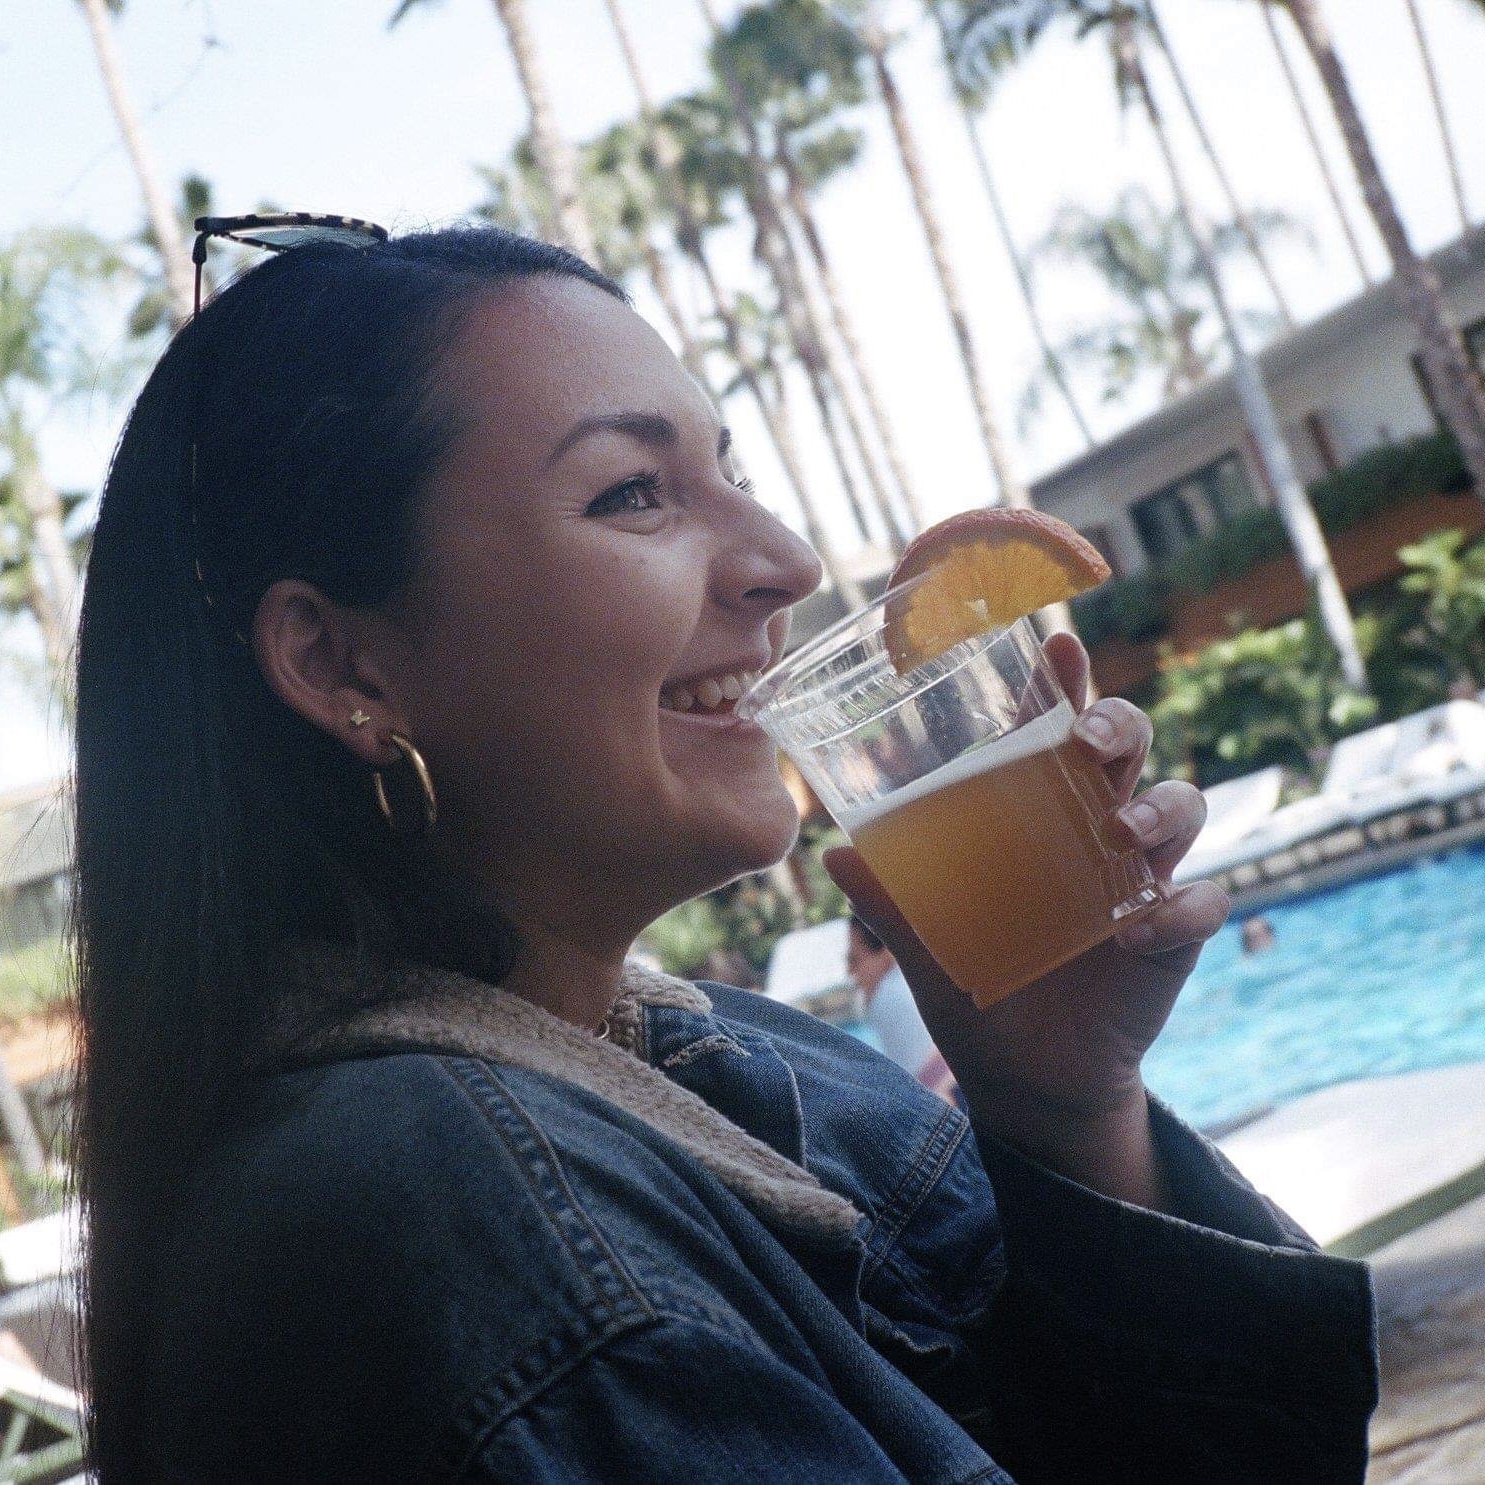 Woman in a denim jacket and hoop earrings drinking a beverage by the pool